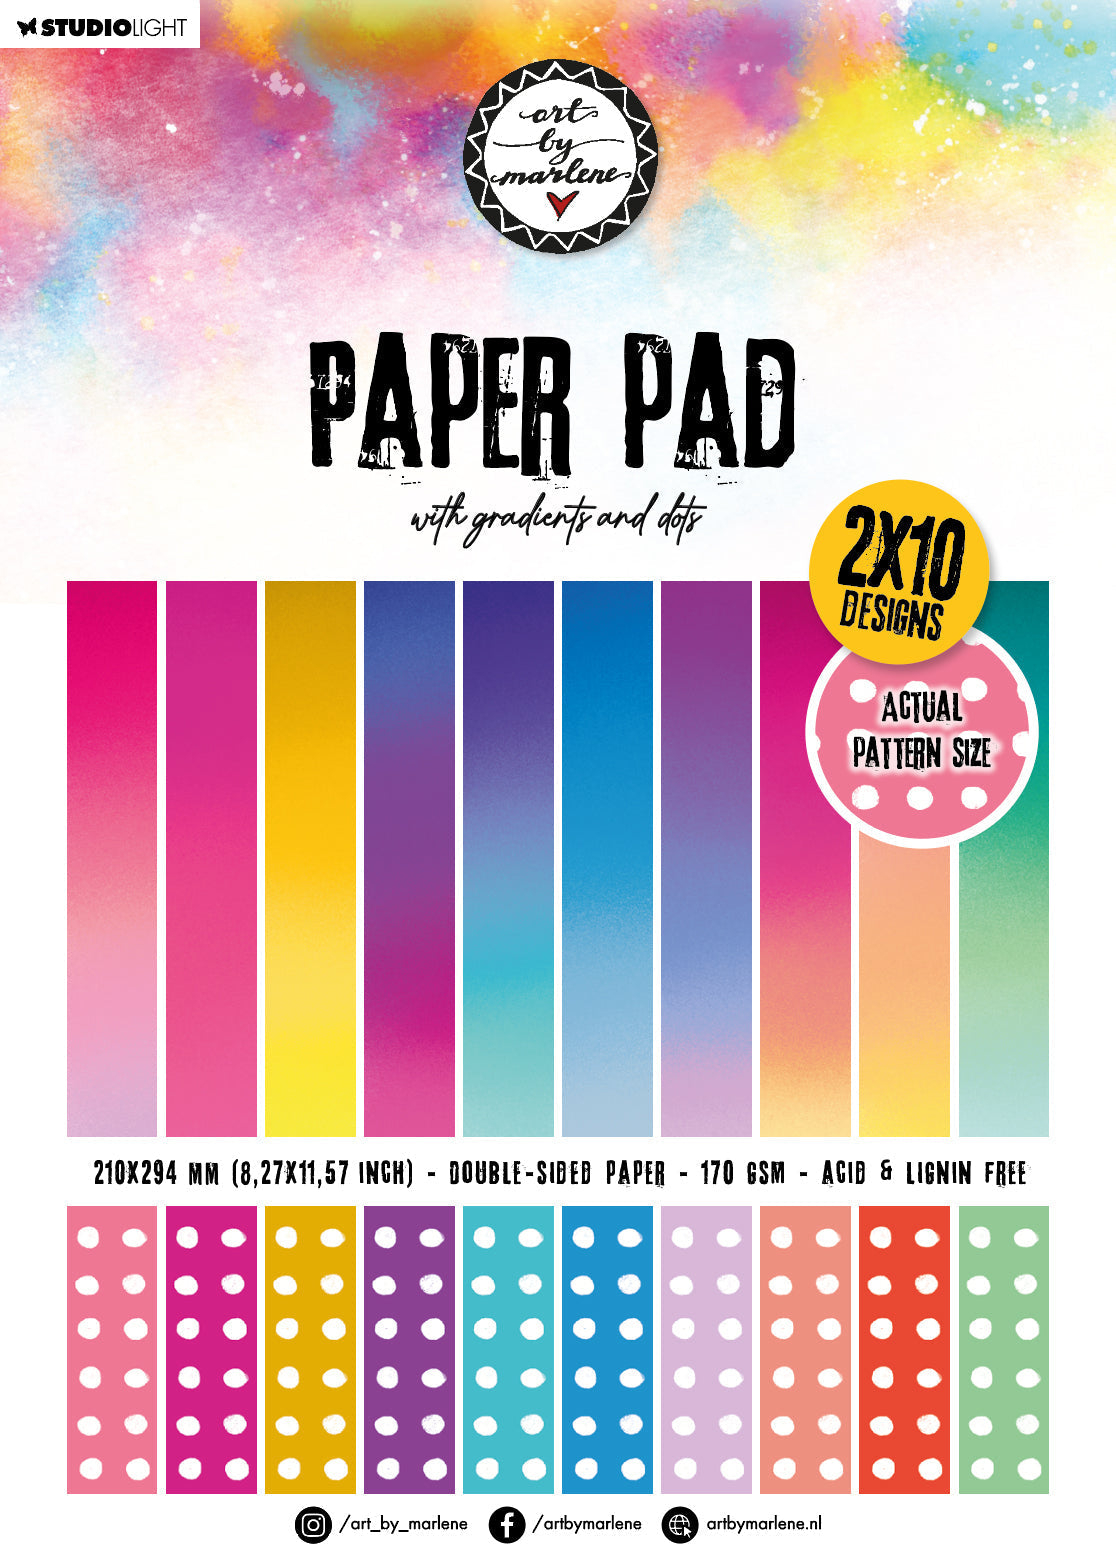 ABM Pattern Paper Pad Gradients And Dots Essentials Collection 20 SH